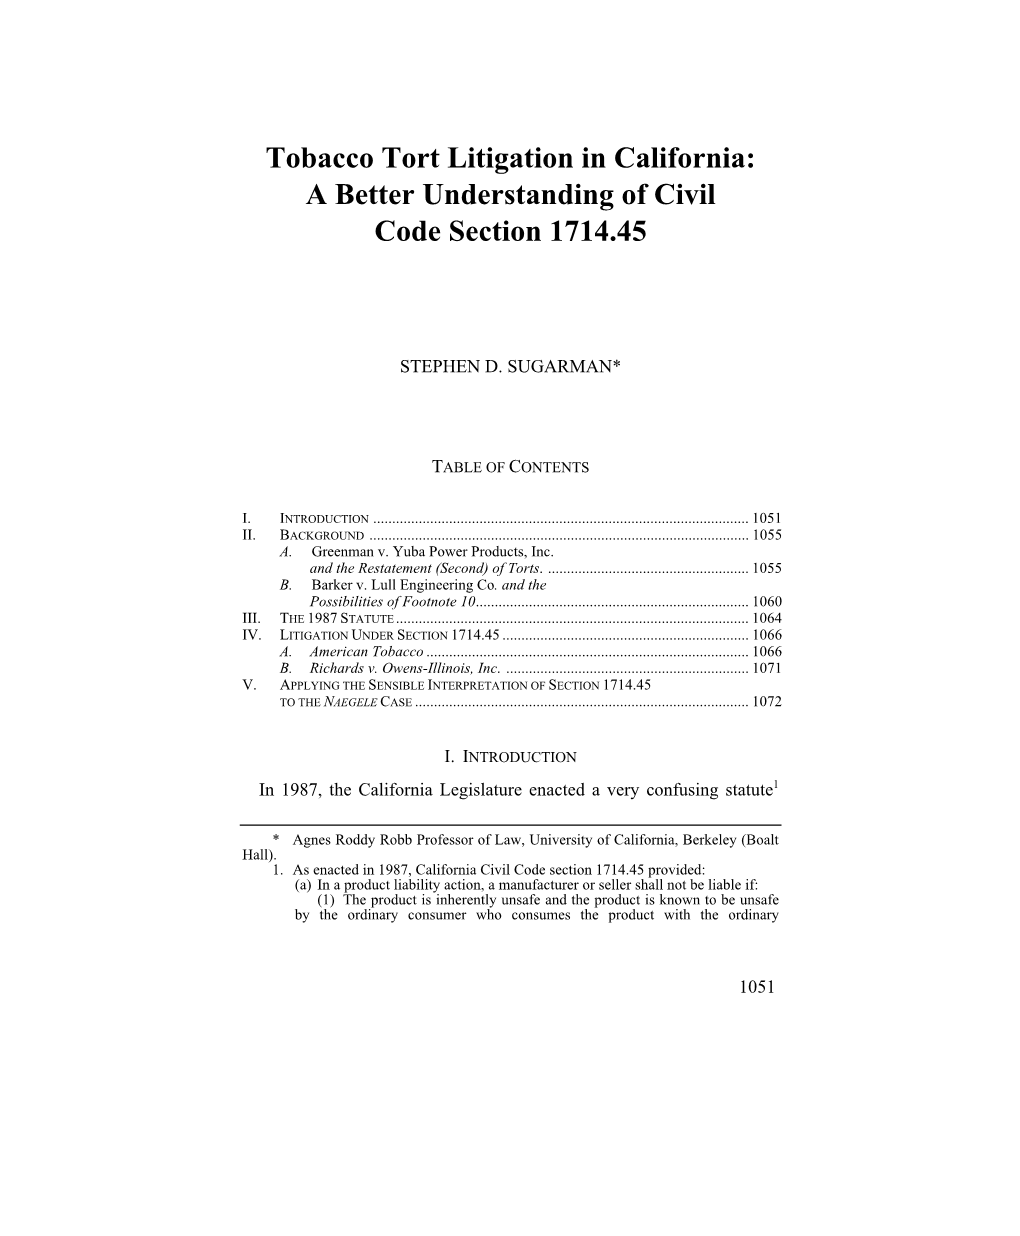 Tobacco Tort Litigation in California: a Better Understanding of Civil Code Section 1714.45